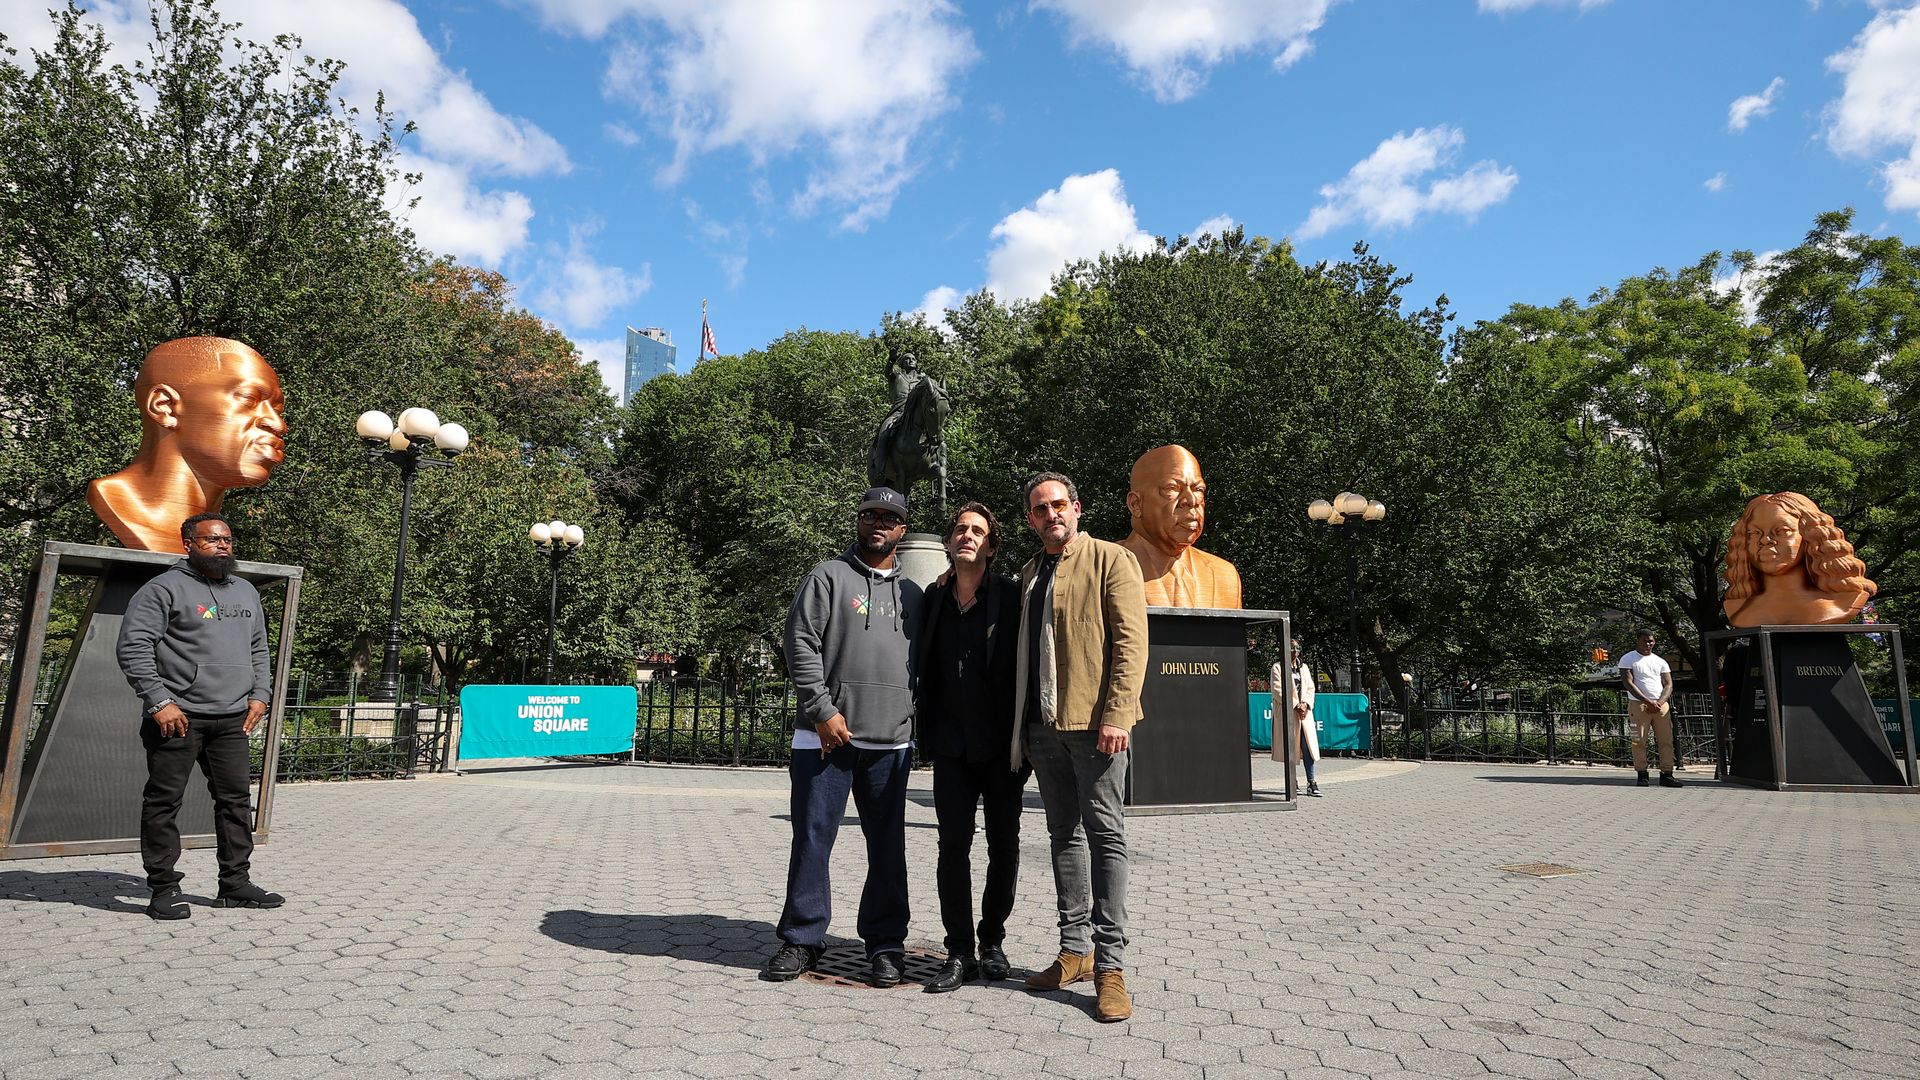 George Floyd's brother Terrence Floyd and Artist Chris Carnabuci attend the ceremony of placing statues at Union Square in New York City